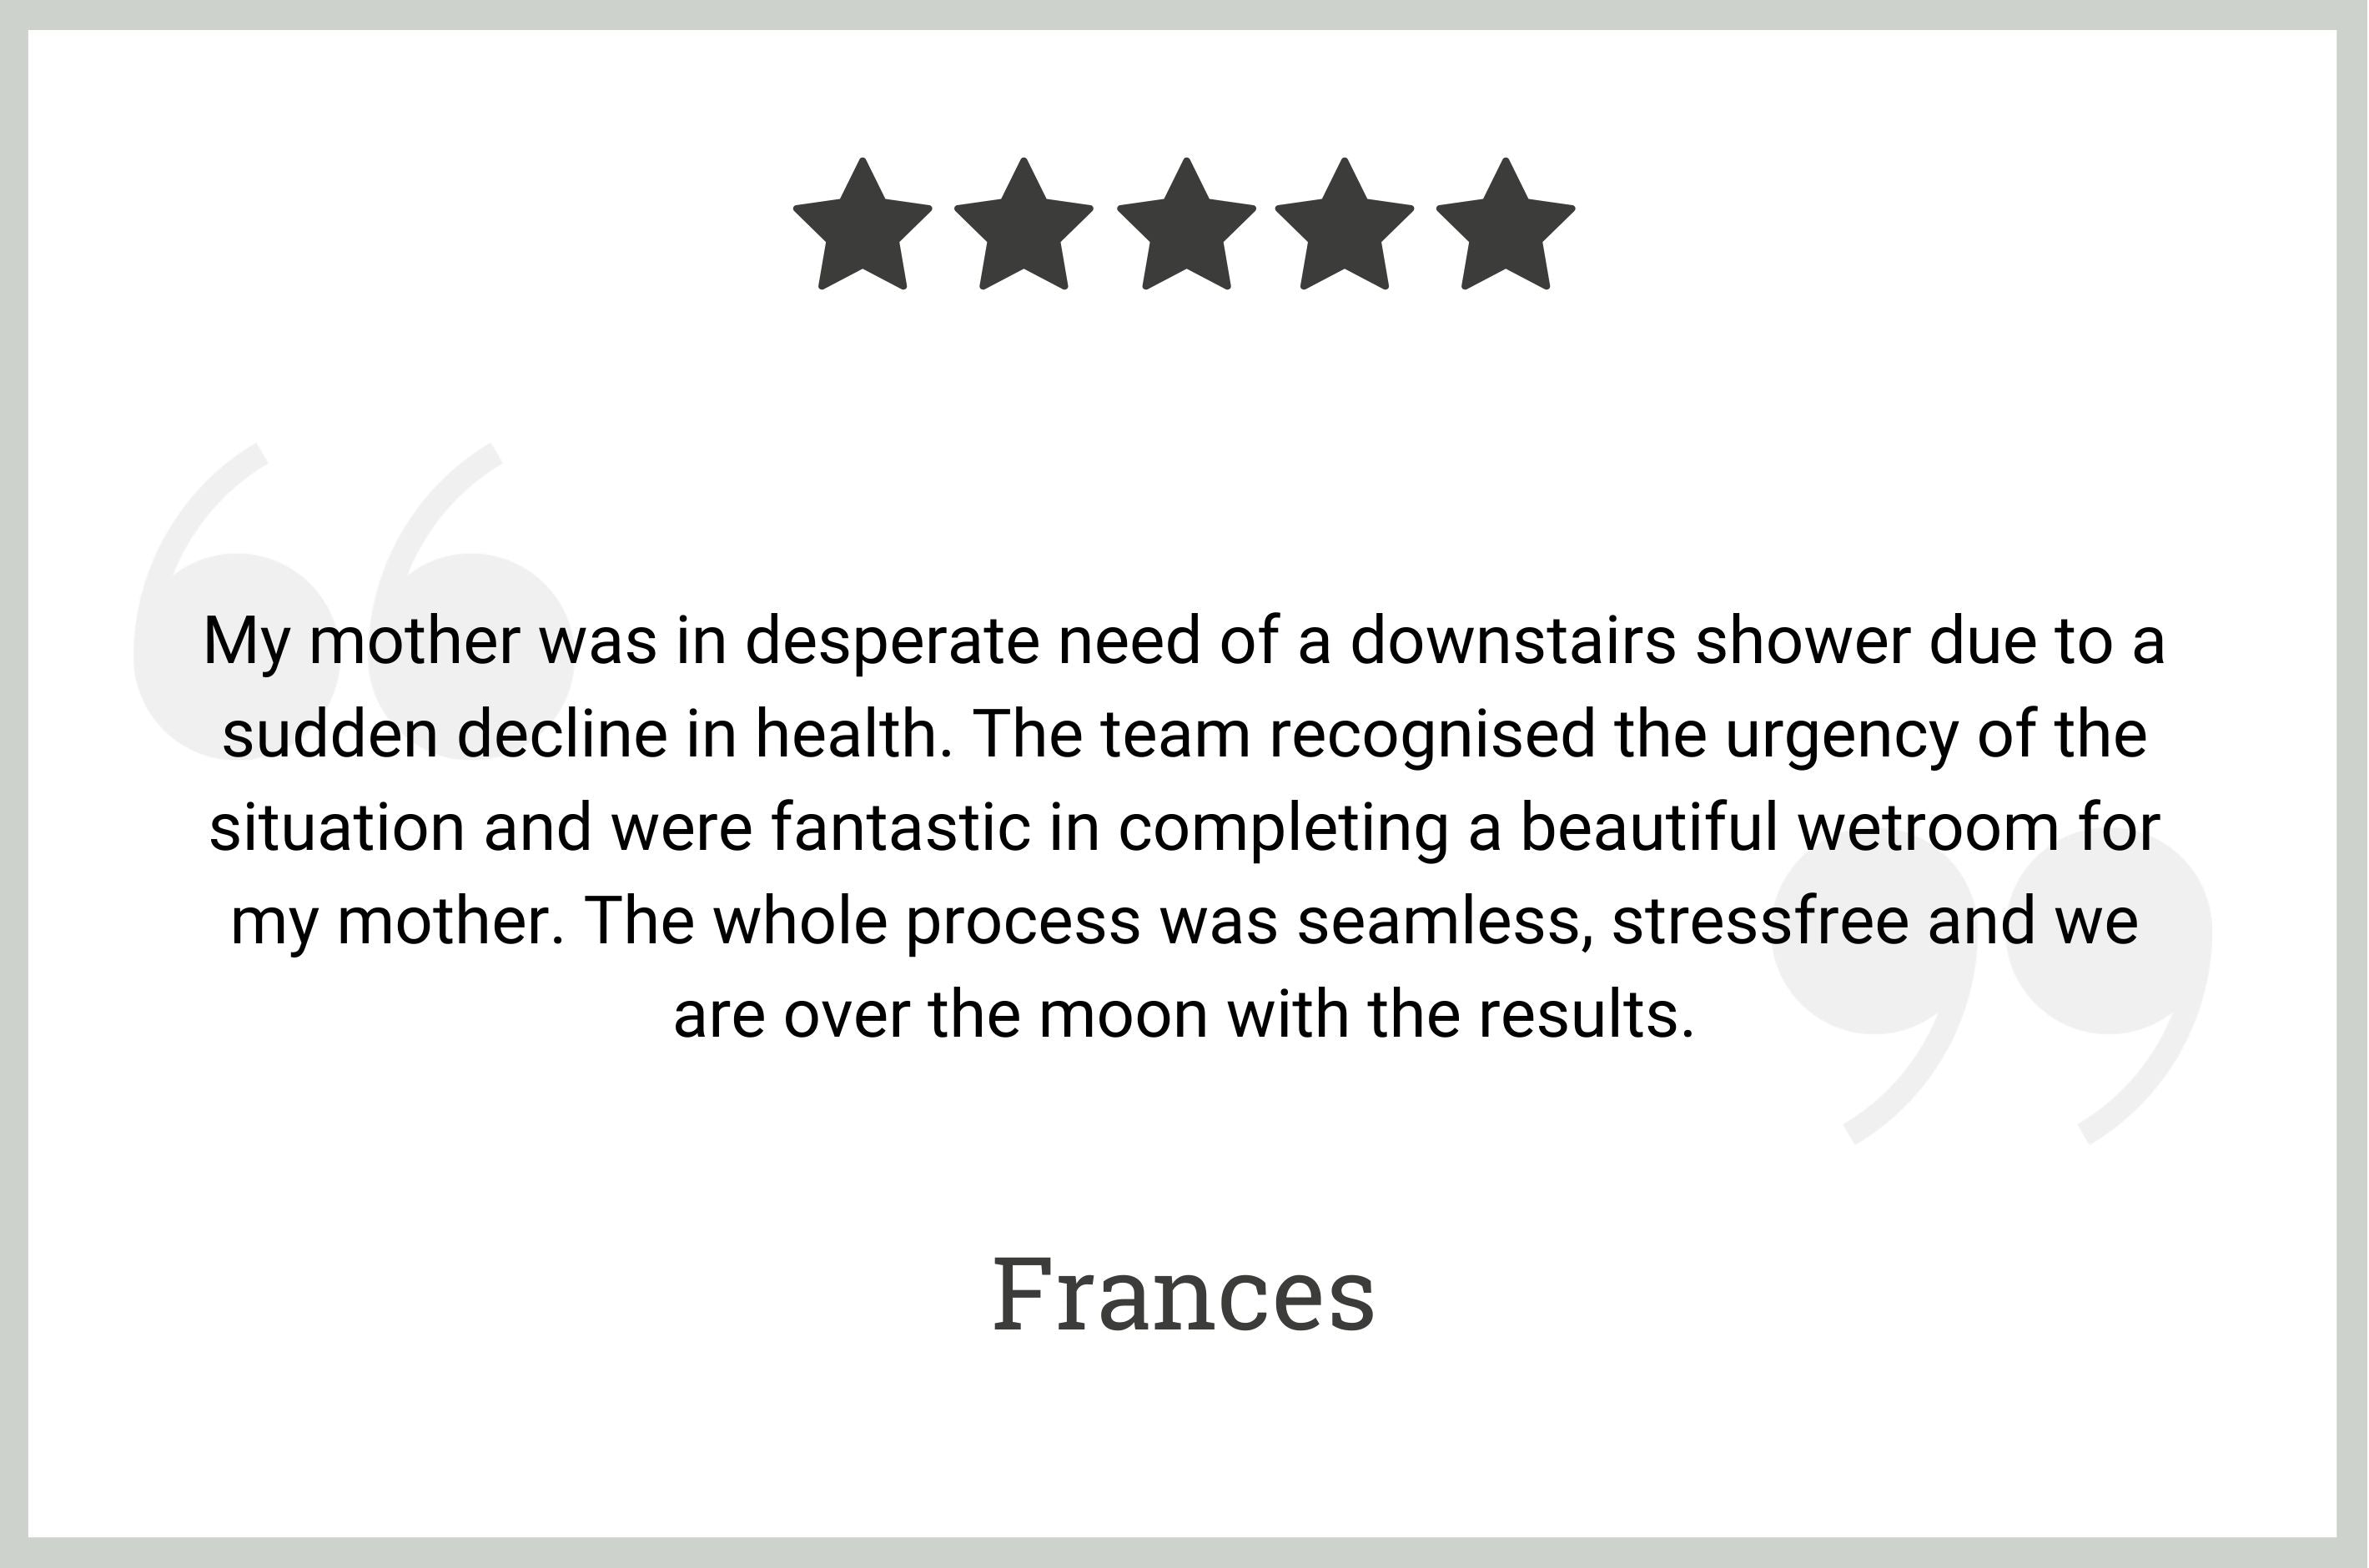 5 star review by Frances